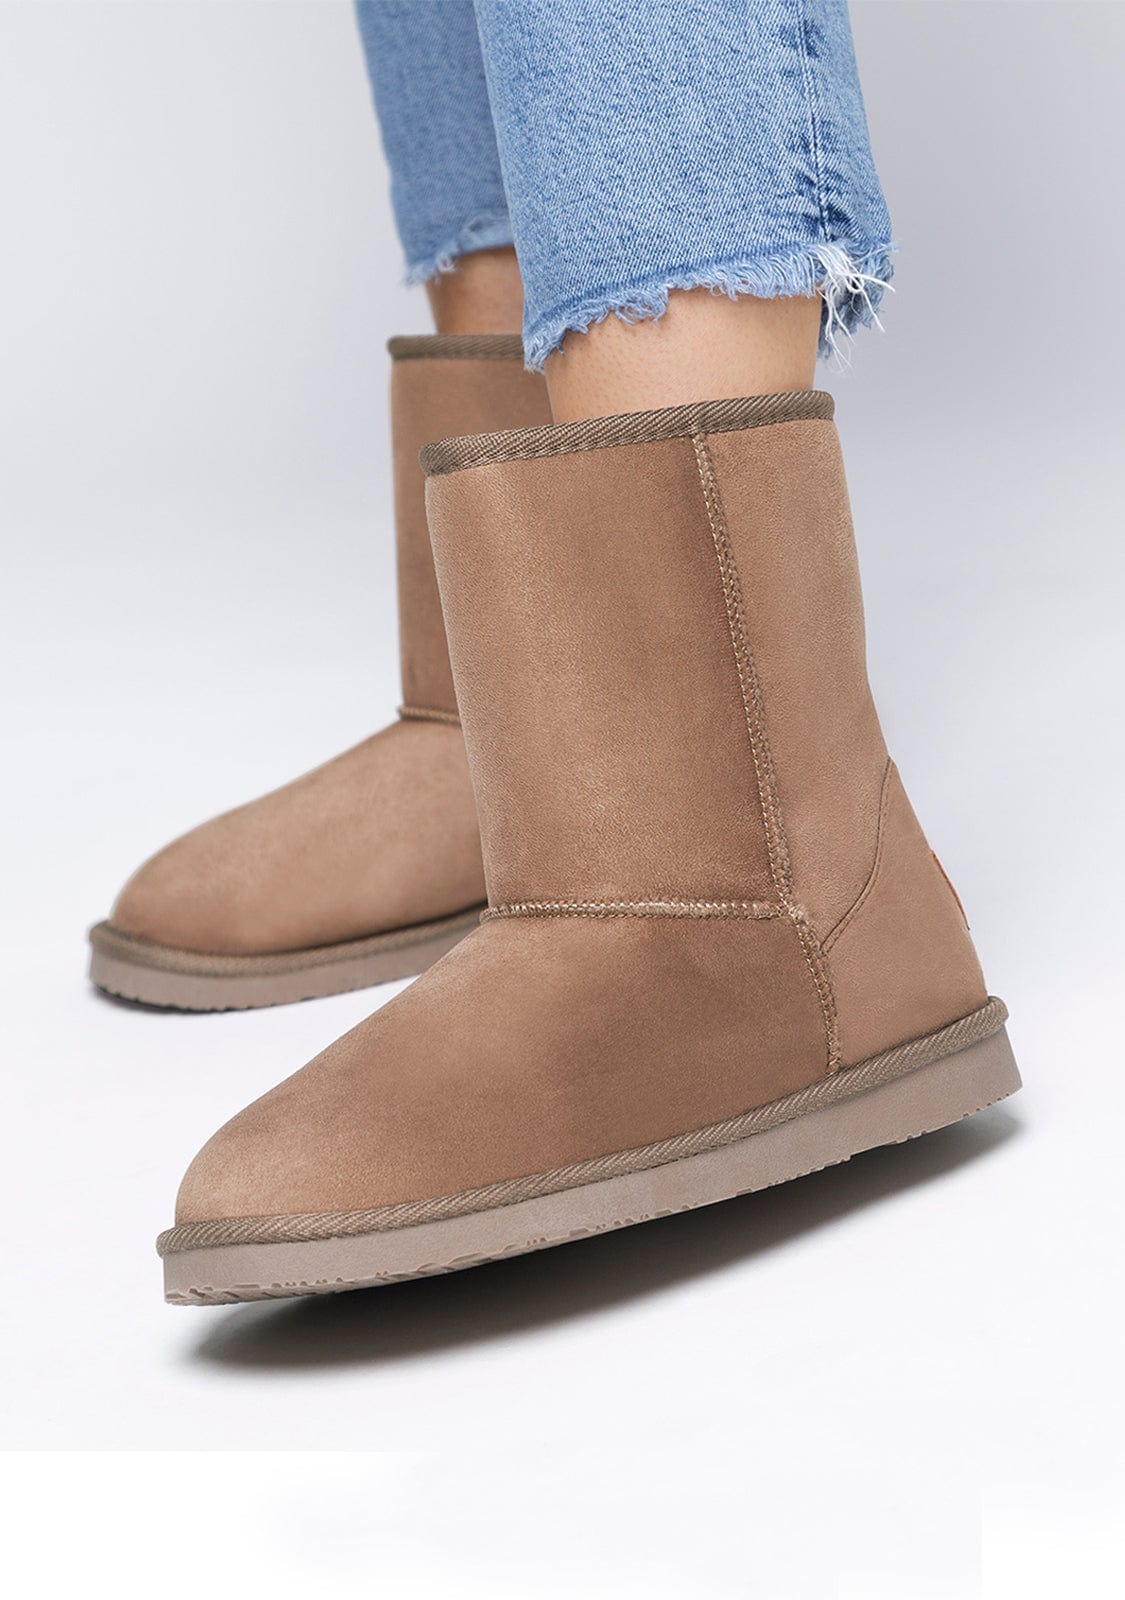 Taupe Basic Australian Boots Water Repellent